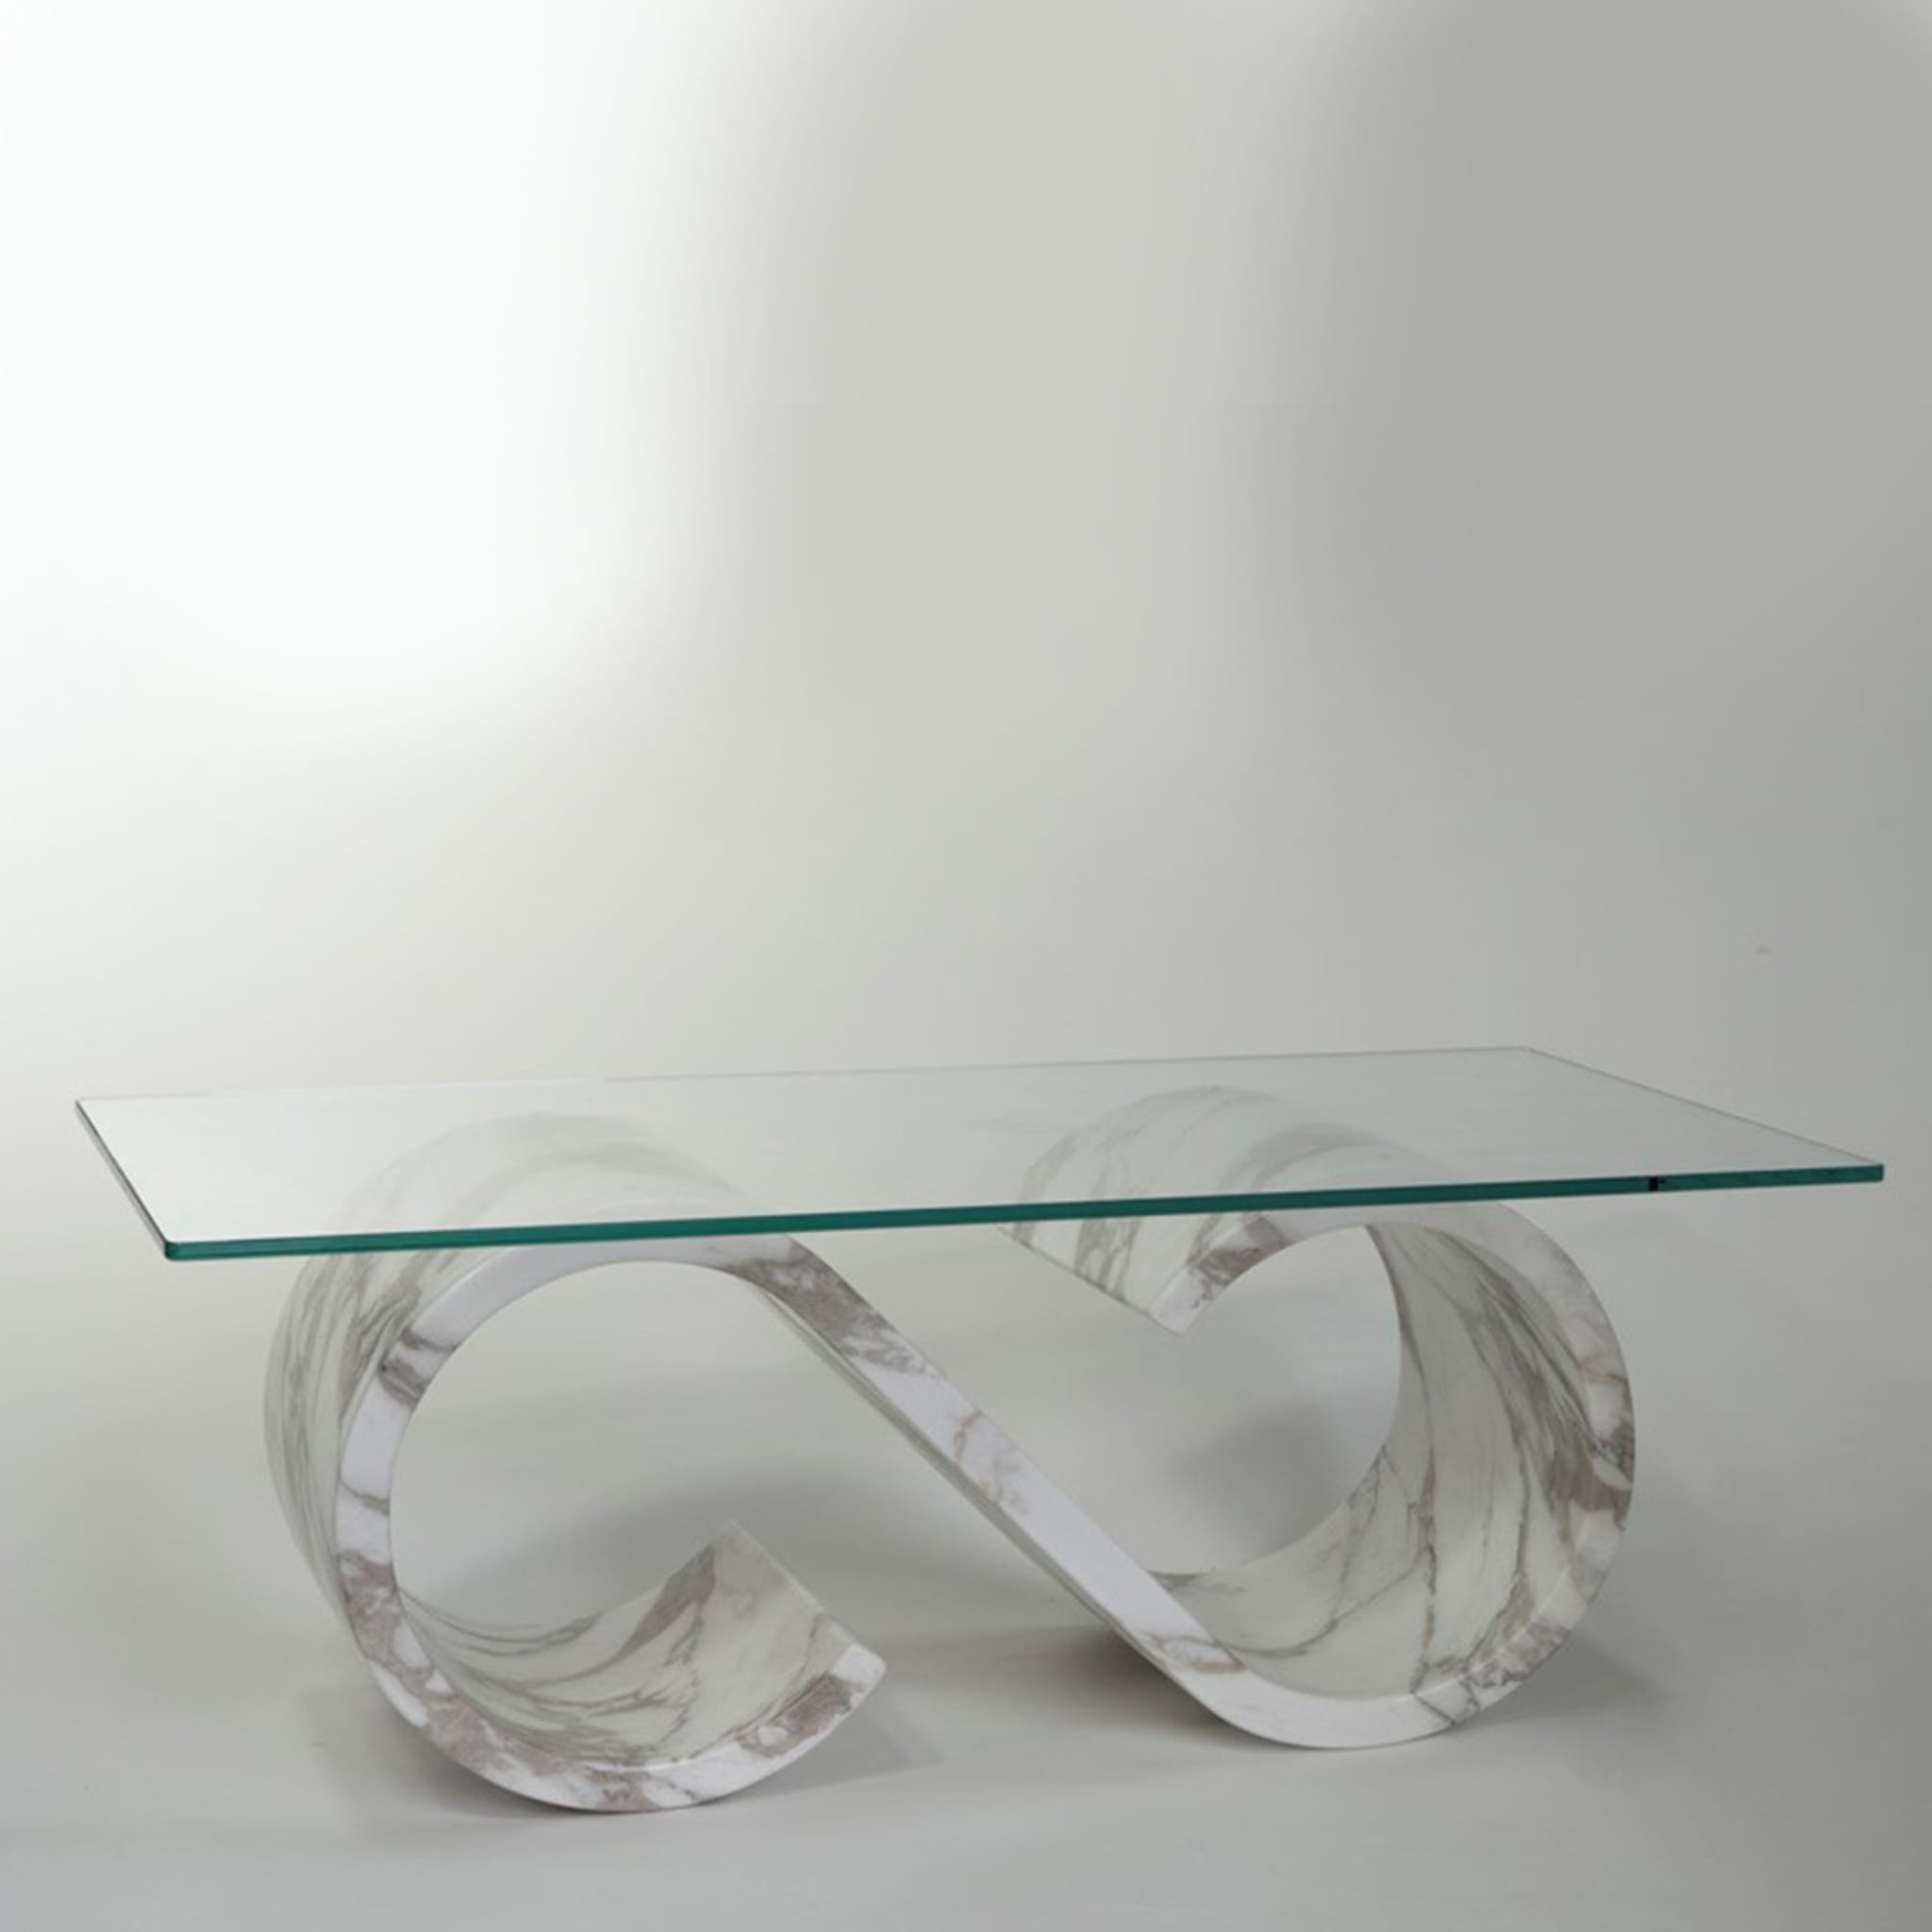 Stefano Marble Coffee Table  - Alternative view 2